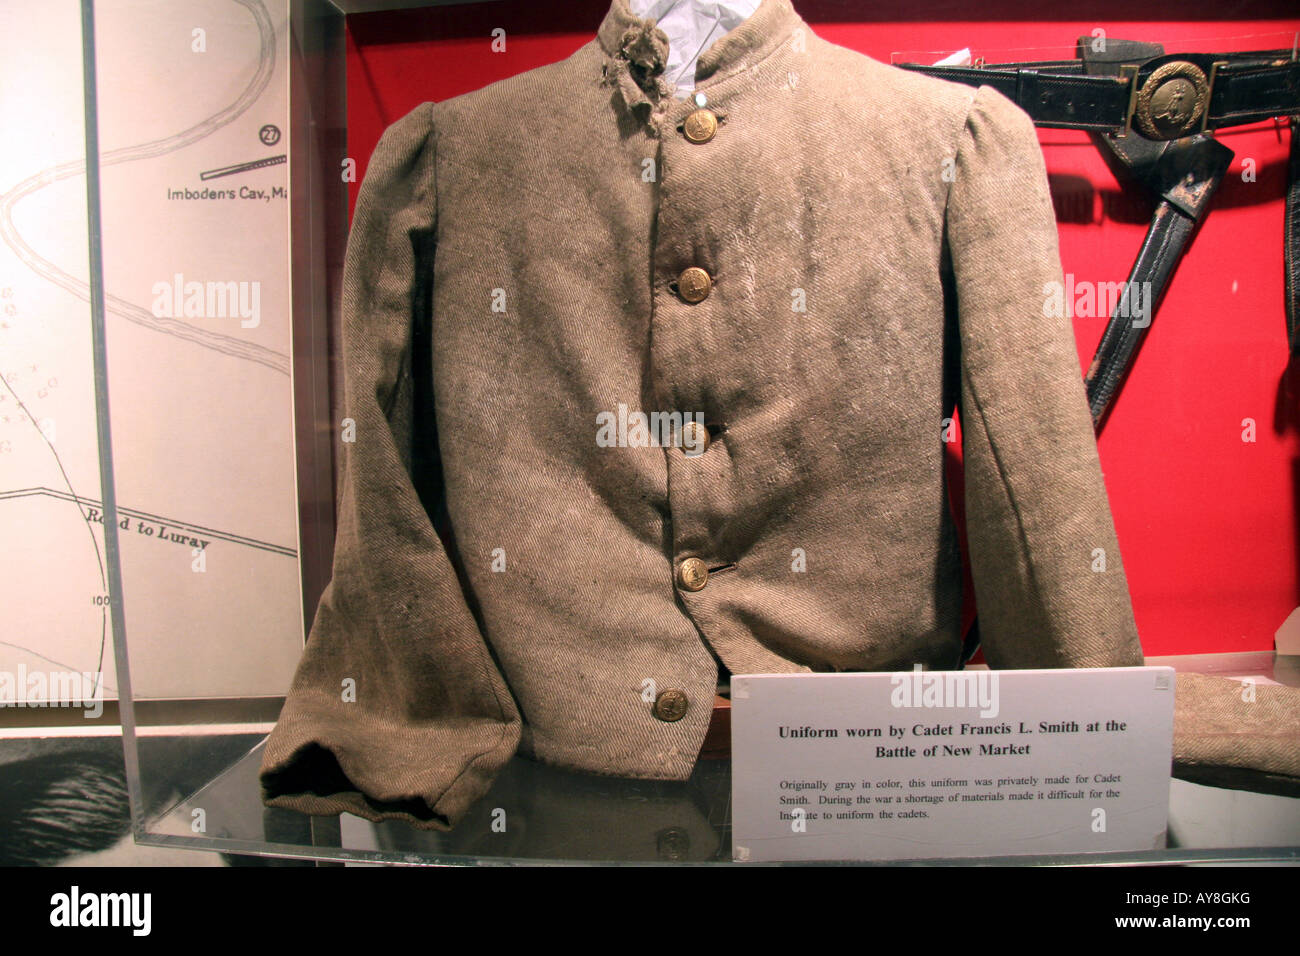 The uniform worn by Cadet Francis Smith during the Battle of New Market, Battlefield State Historical Park, Virginia. Stock Photo